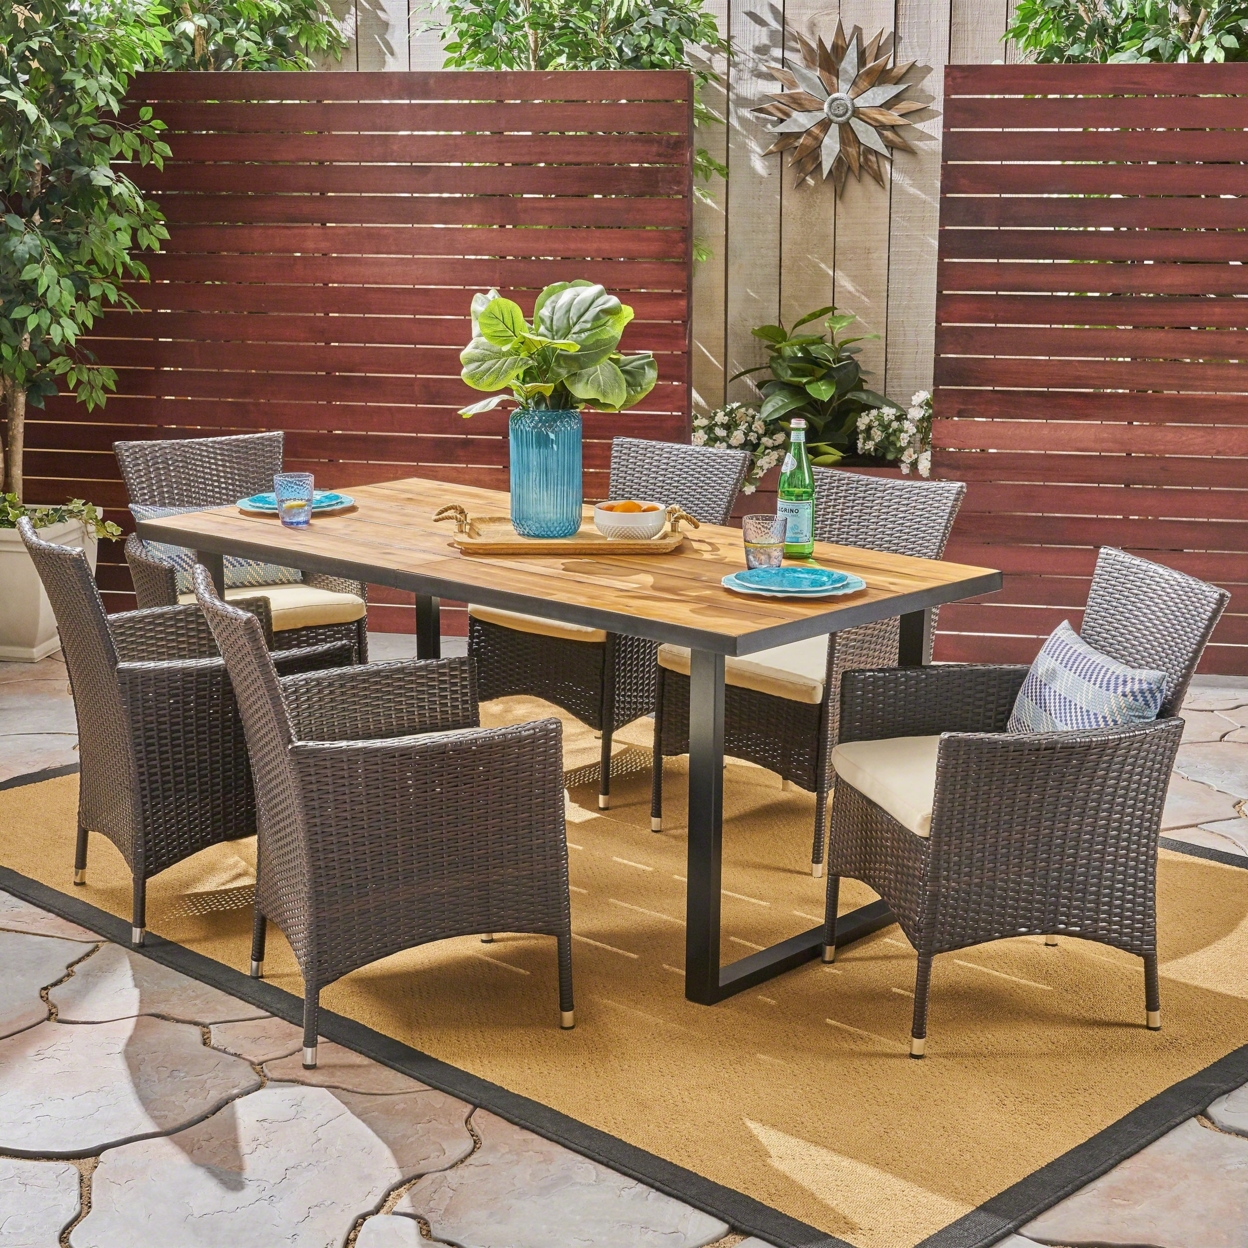 Belle Outdoor 6-Seater Rectangular Acacia Wood And Wicker Dining Set, Teak With Black And Multi Brown With Beige